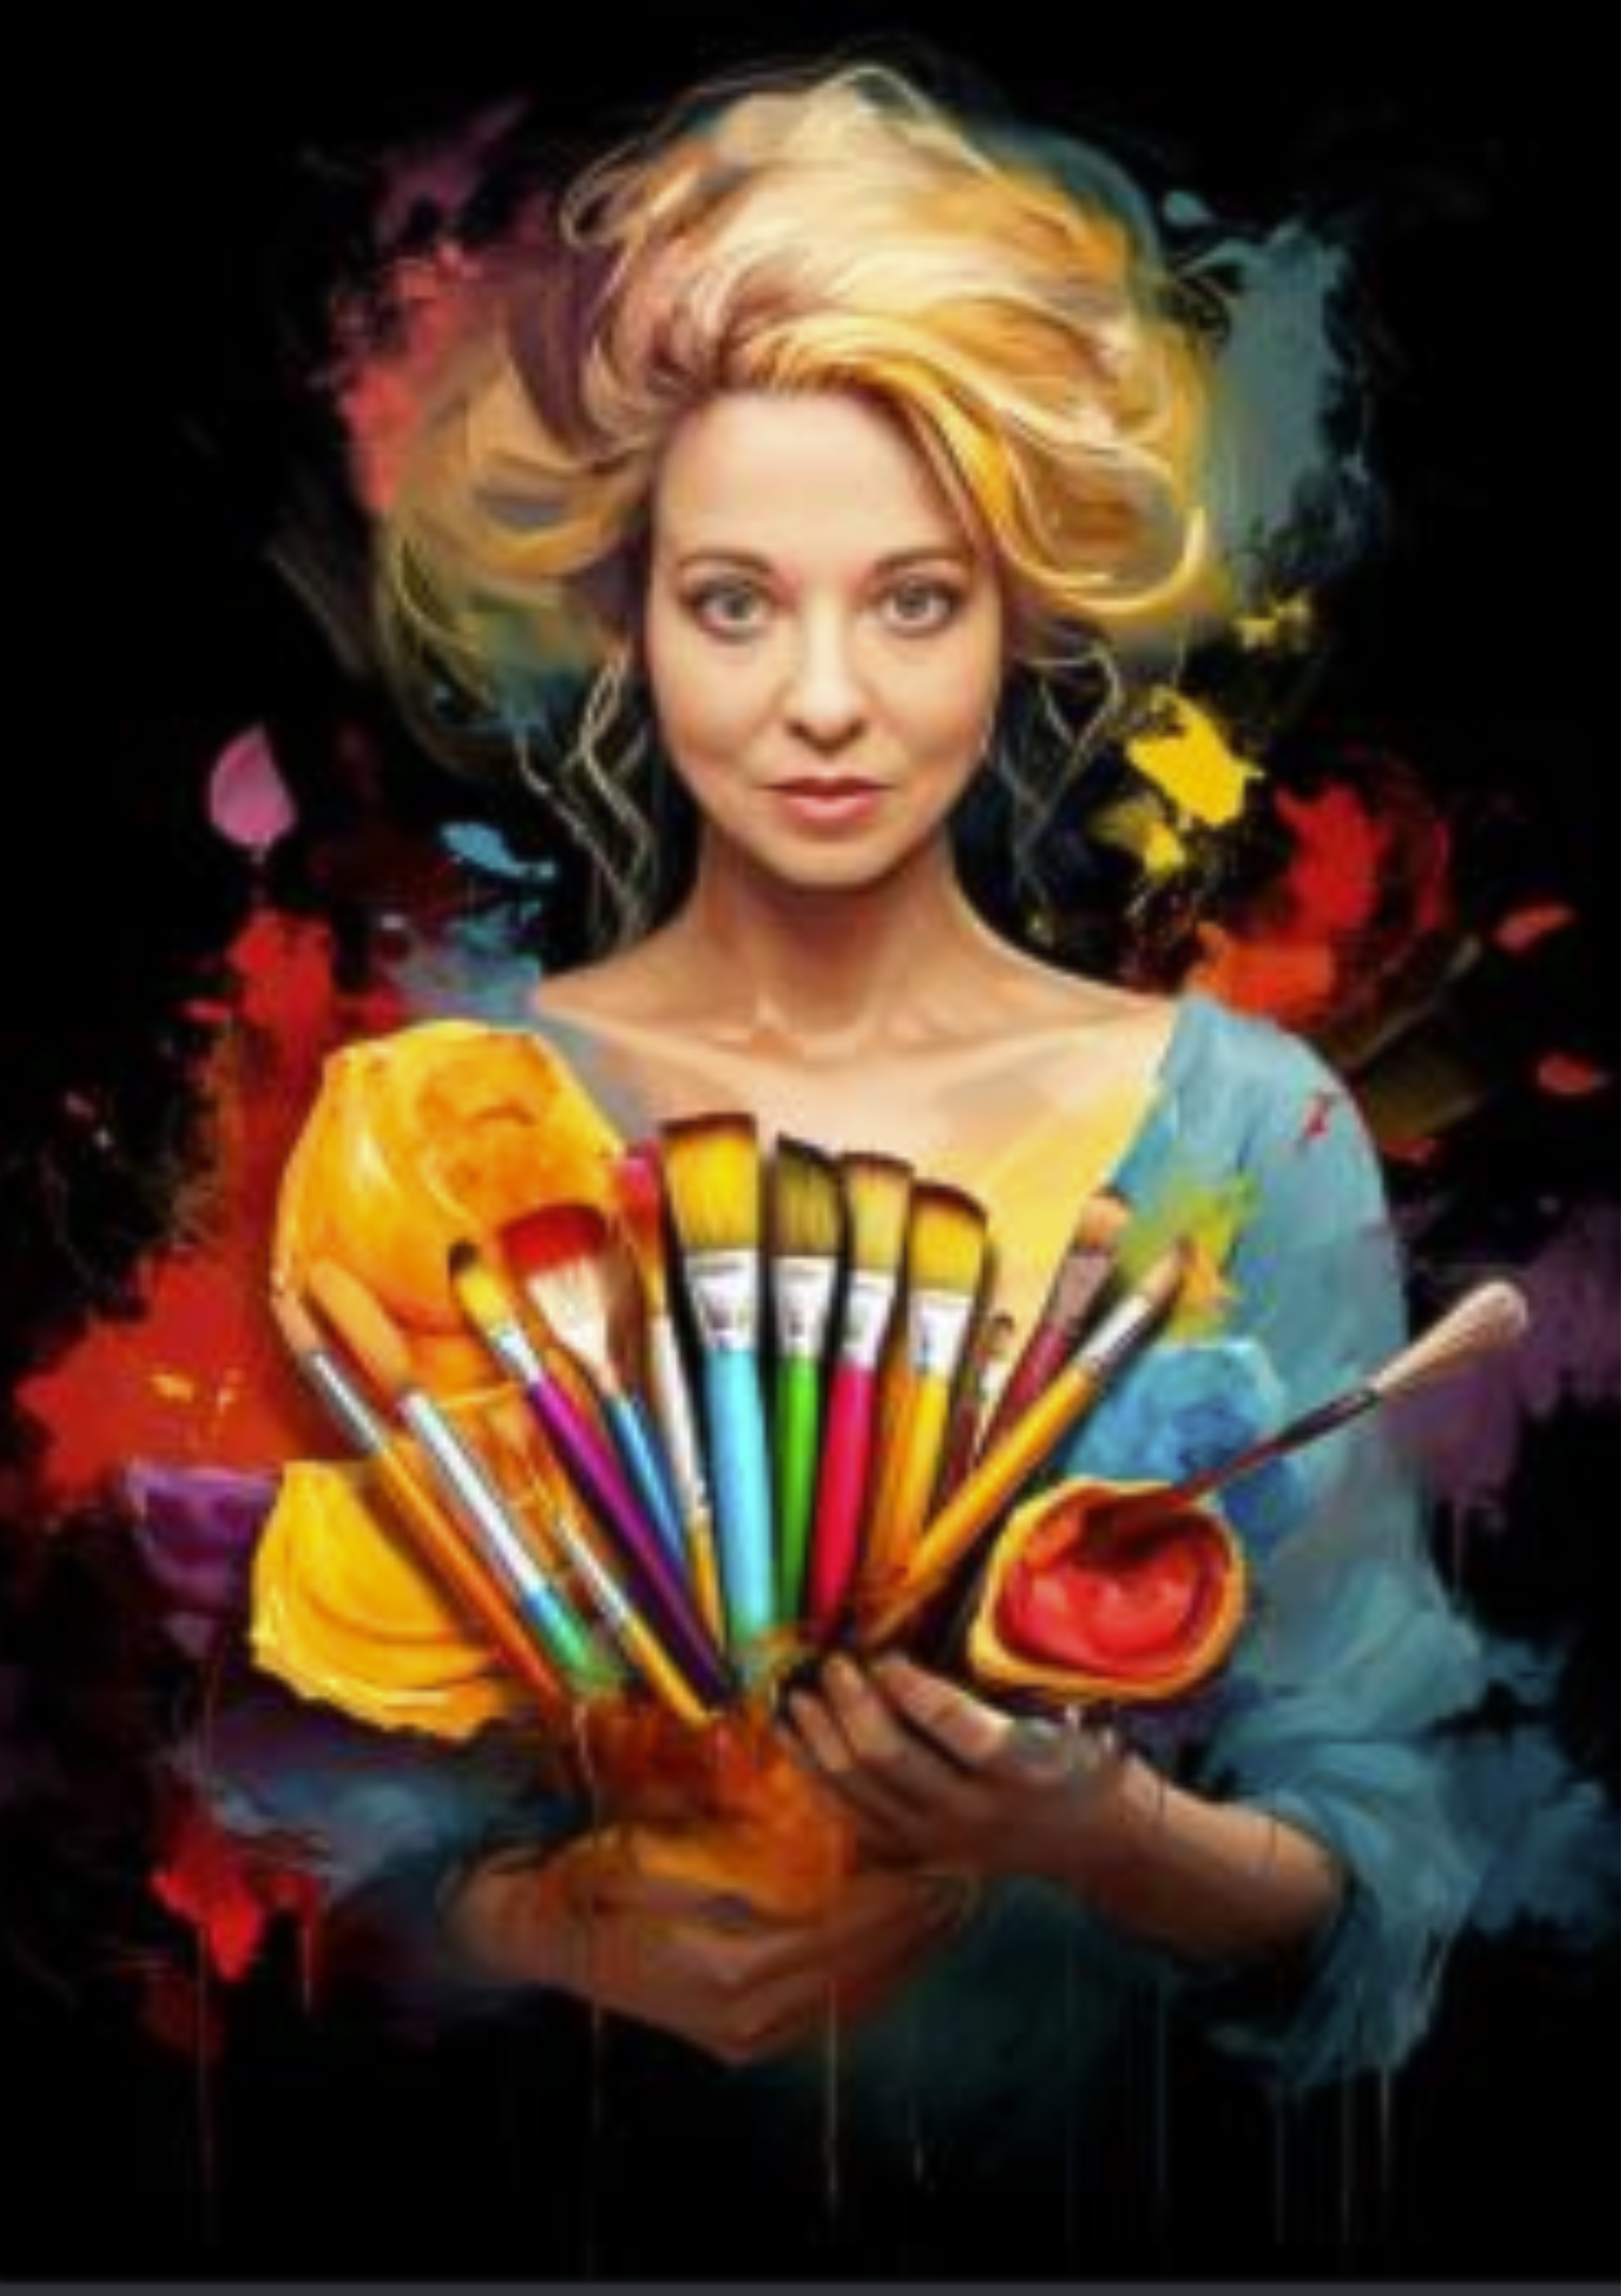 Portrait of Dawn Roeske, a therapeutic art life coach, depicted in an AI-enhanced image. Dawn’s face is at the center, surrounded by a dynamic burst of colors that represent her creative impact. She holds an array of paintbrushes, symbolizing her tools for healing through art. The vibrant splashes of paint form a visual metaphor for the transformative journey from trauma to beauty. This image encapsulates Dawn’s mission to help others heal through the power of artistic expression